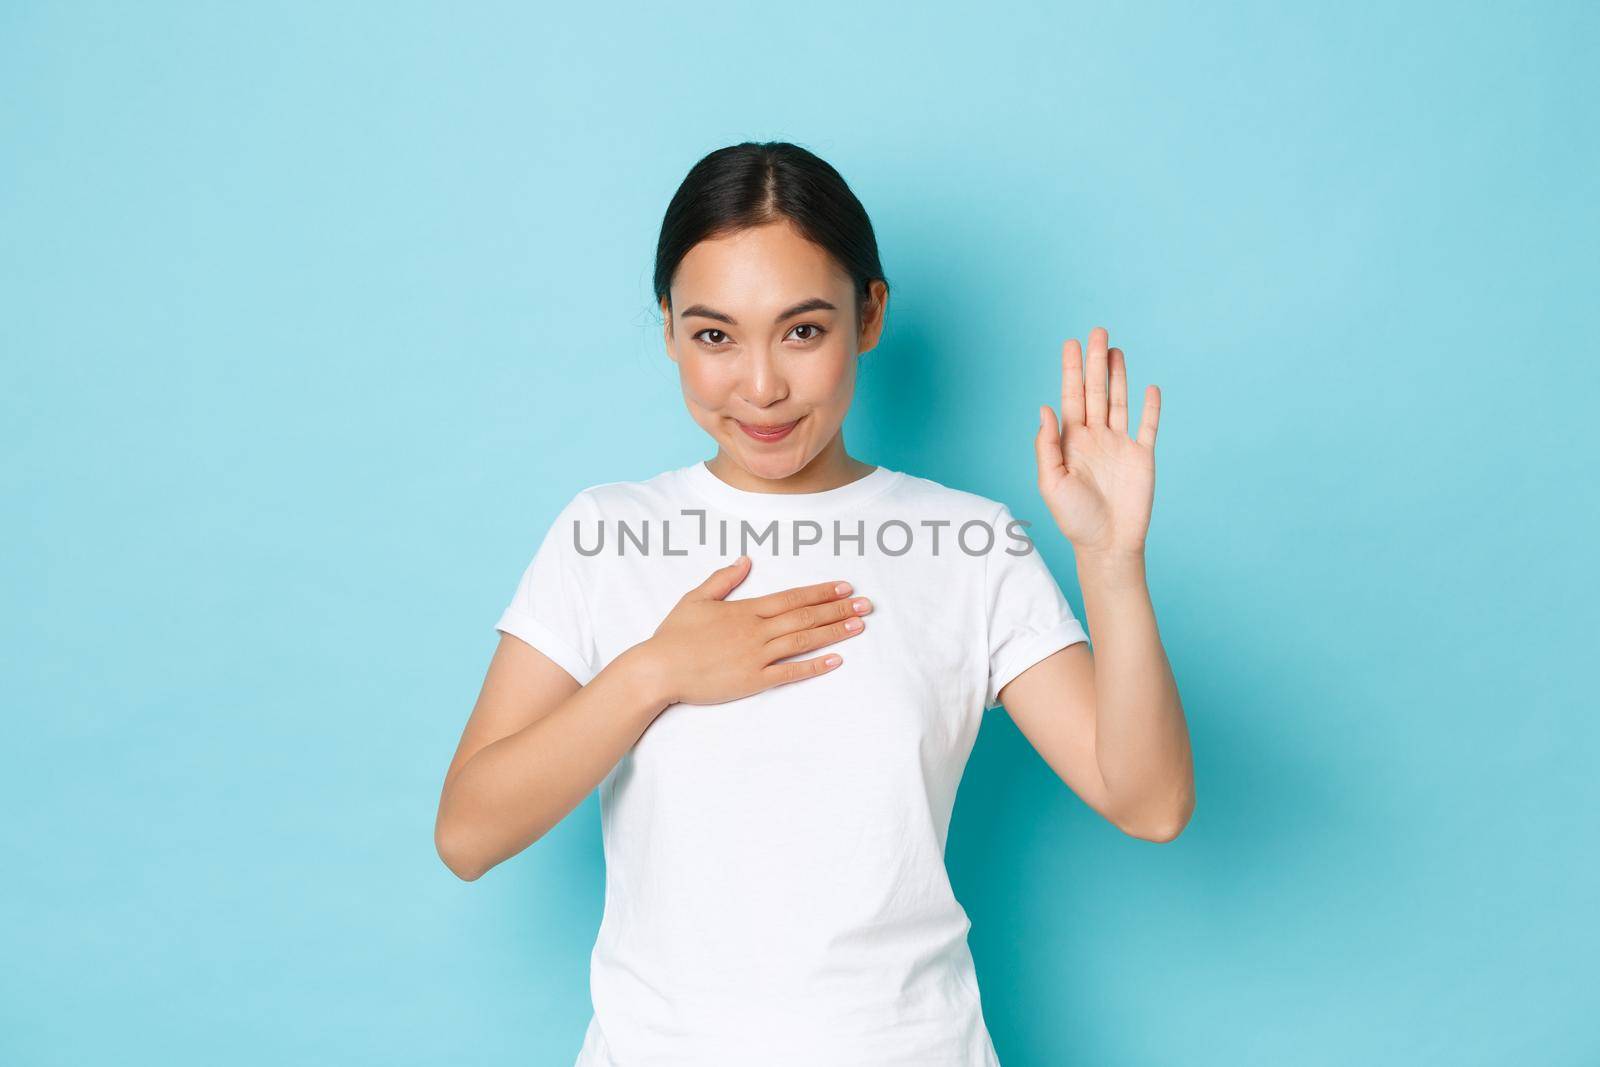 Cute smiling asian girl swearing to tell only truth, making oath or pledge on something. Adorable korean female student hold hand on heart and arm raised while being honest, blue background.